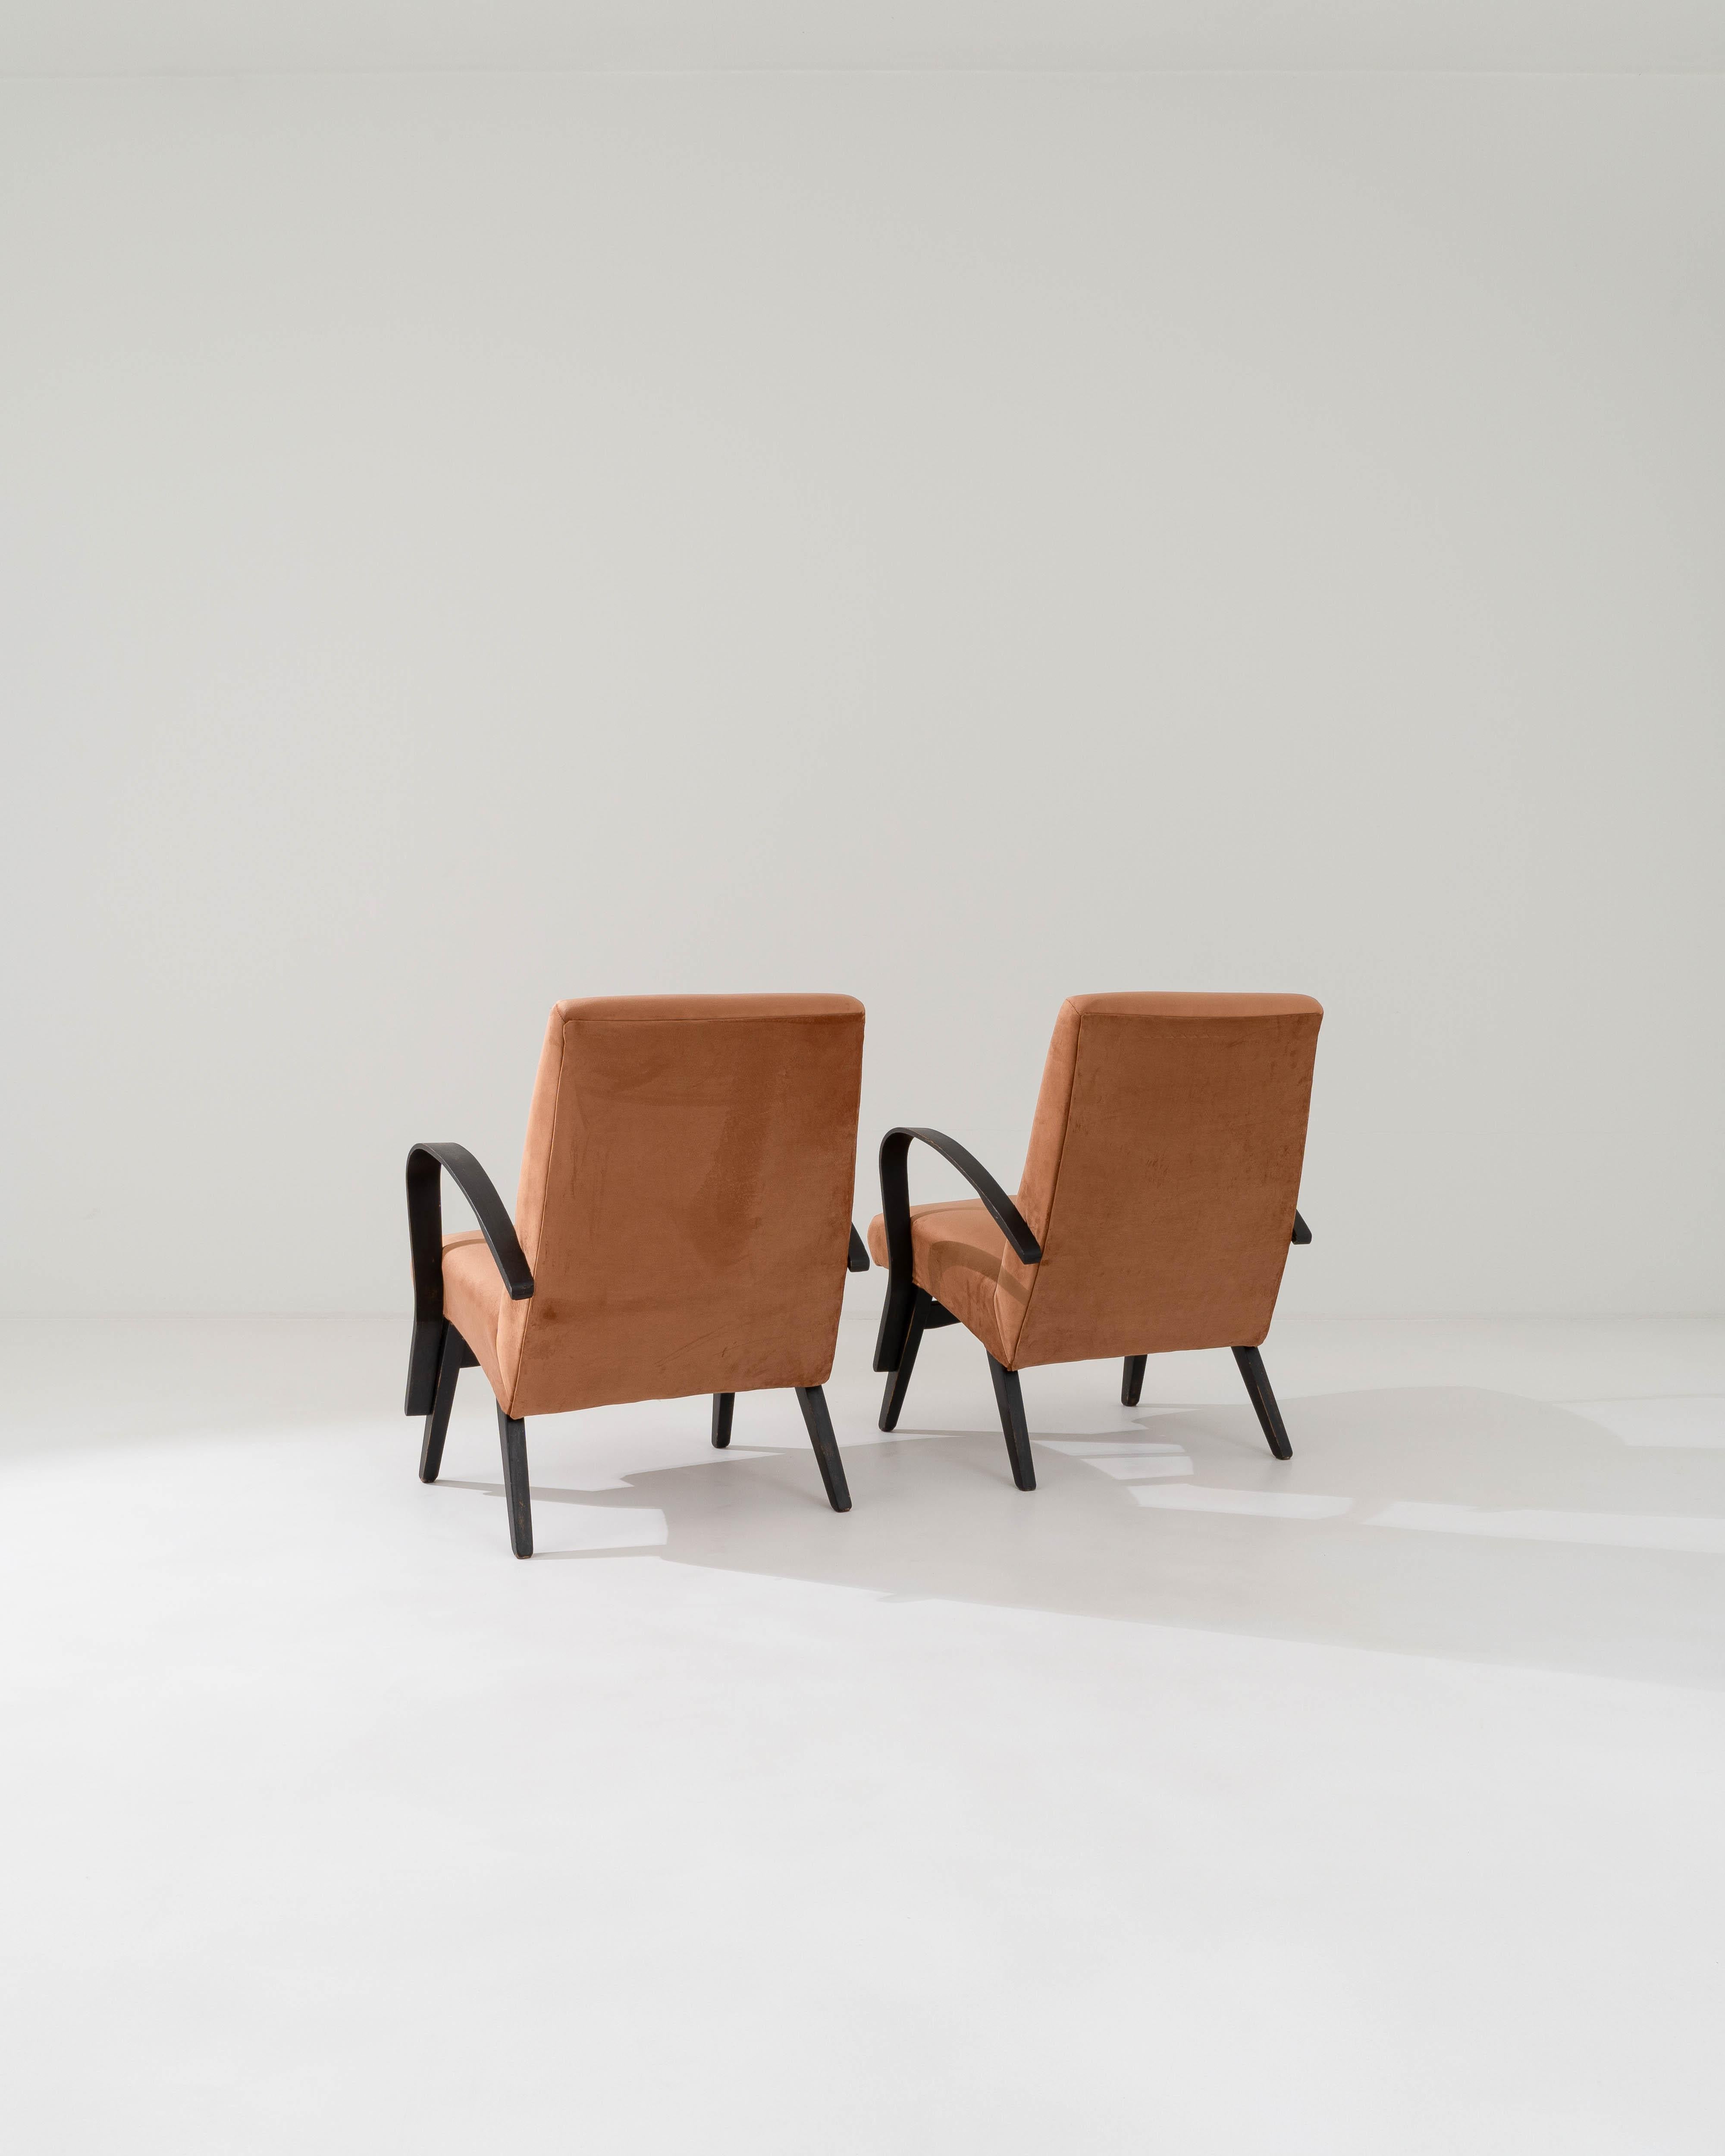 1960s Czech Upholstered Armchairs By Tatra, a Pair For Sale 4